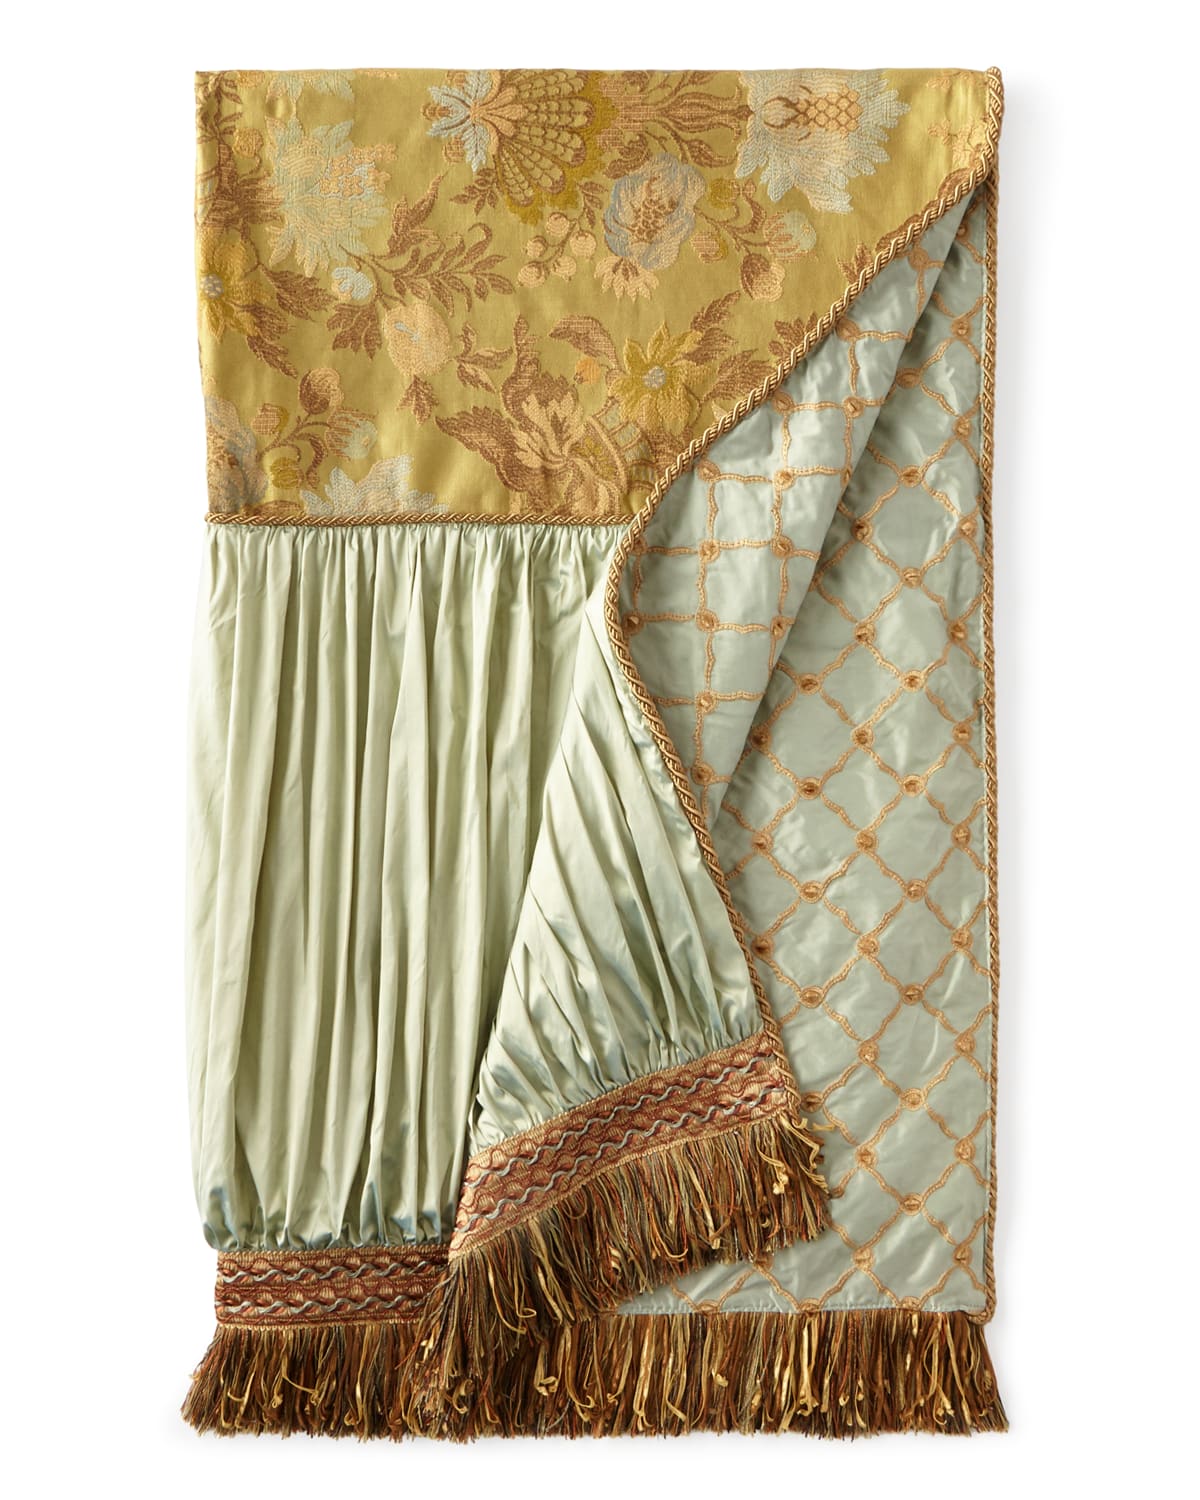 Image Dian Austin Couture Home Petit Trianon Pieced Throw